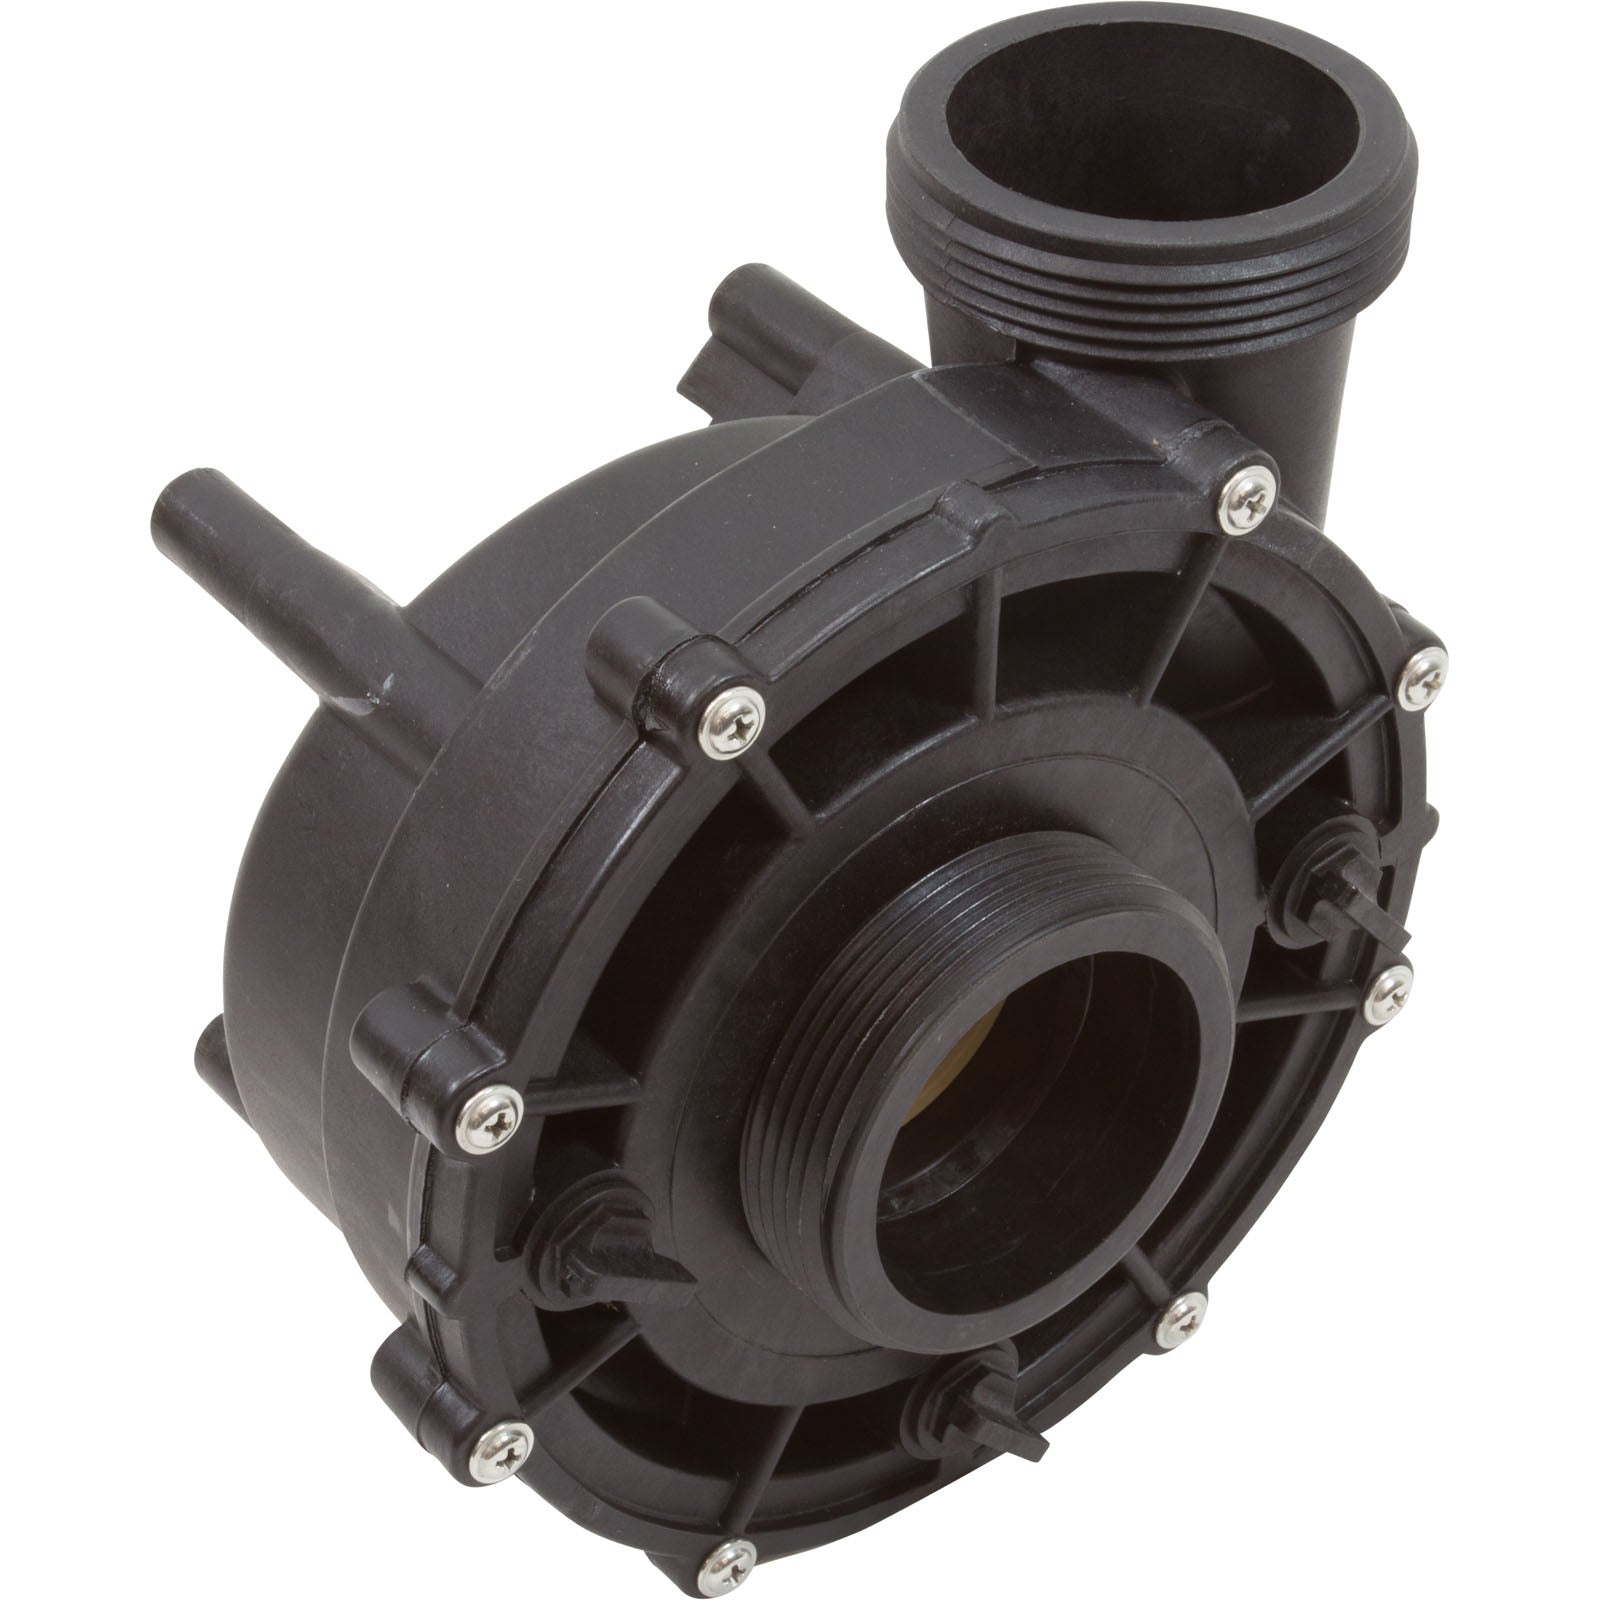 Energy Savers Wetend, LX Pump ONLY, 56WUA500, 5.0HP, SD, 2.5"MBT